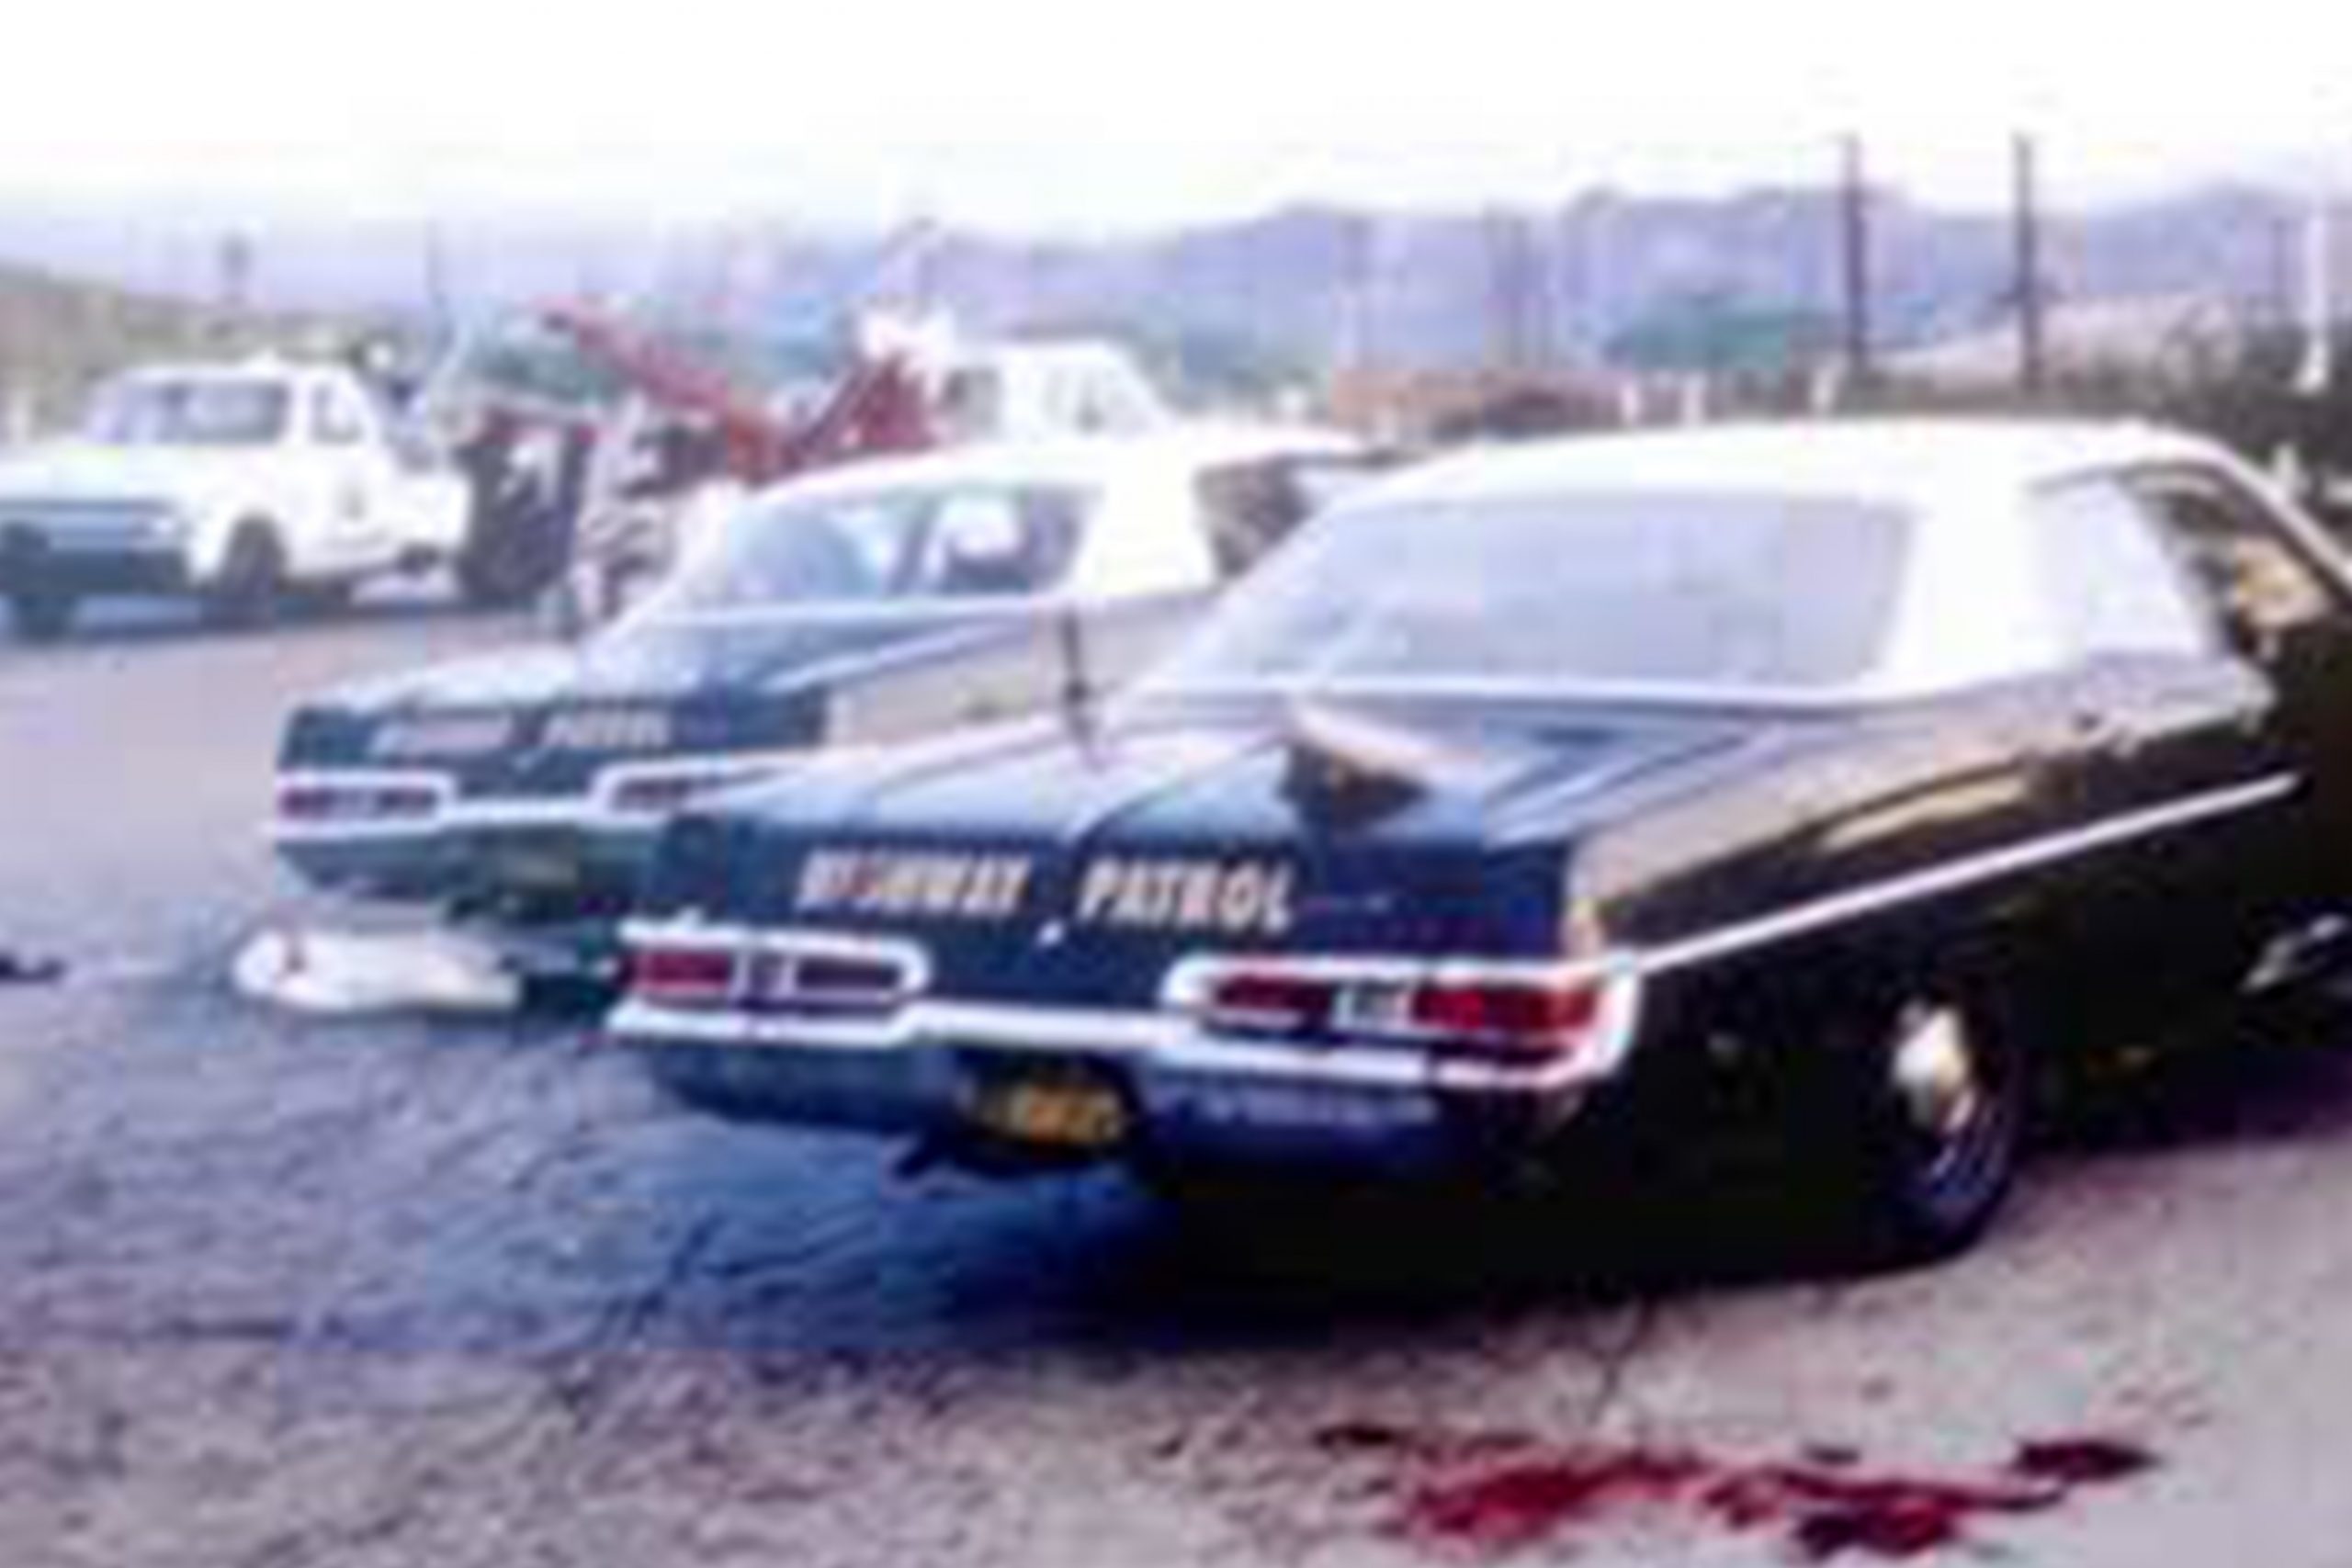 50 years ago today: The Newhall Tragedy